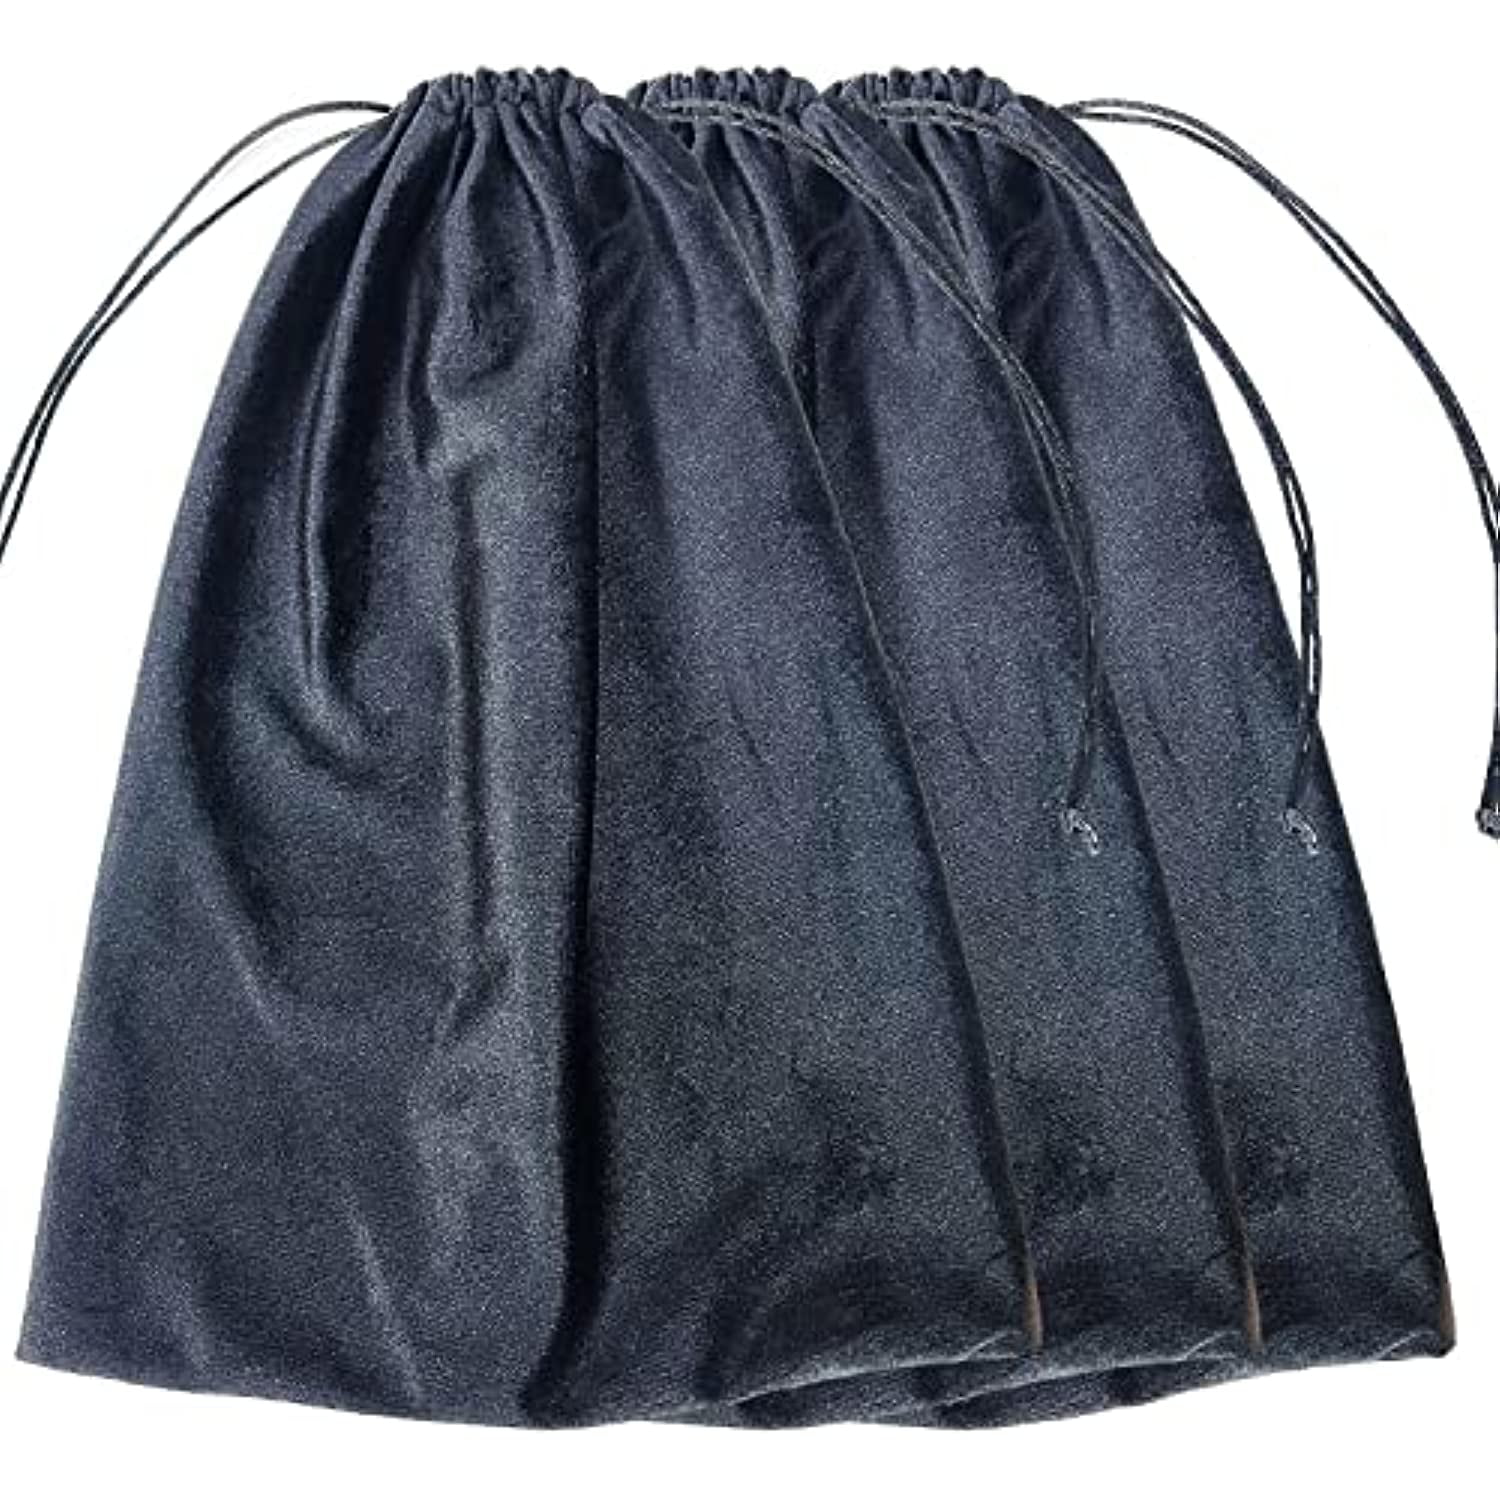 Saihisday 10Packed Silver Storage Bags, Anti-Tarnish Jewelry Storage Bags,  Fabric Cloth Bags for Silver Jewelry Silverware Protection(Black)